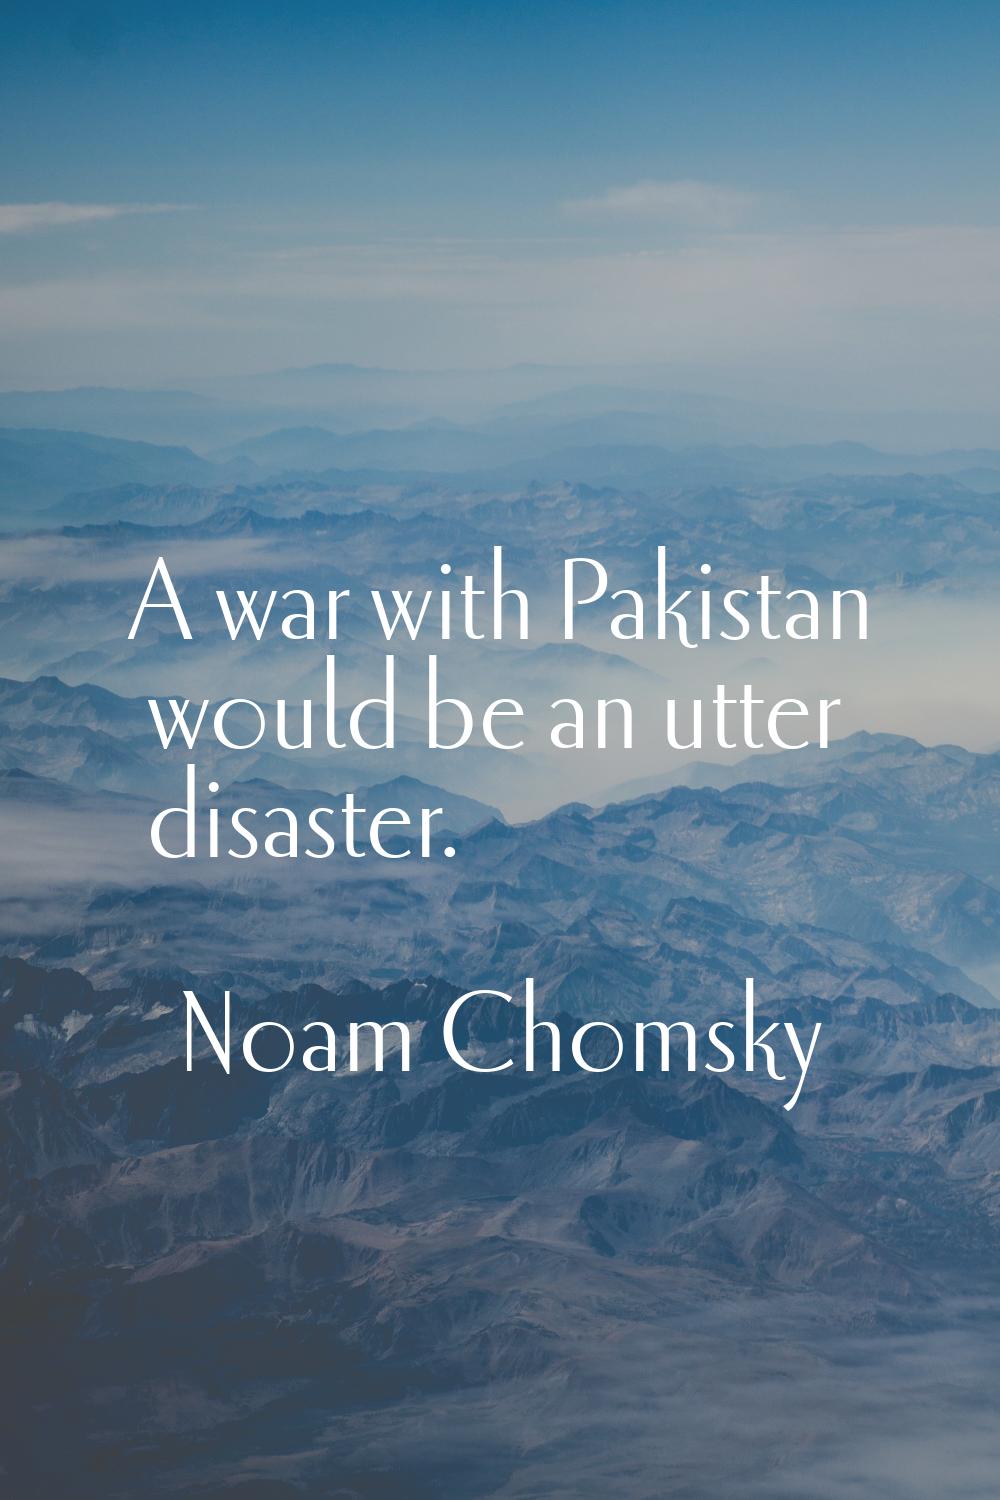 A war with Pakistan would be an utter disaster.